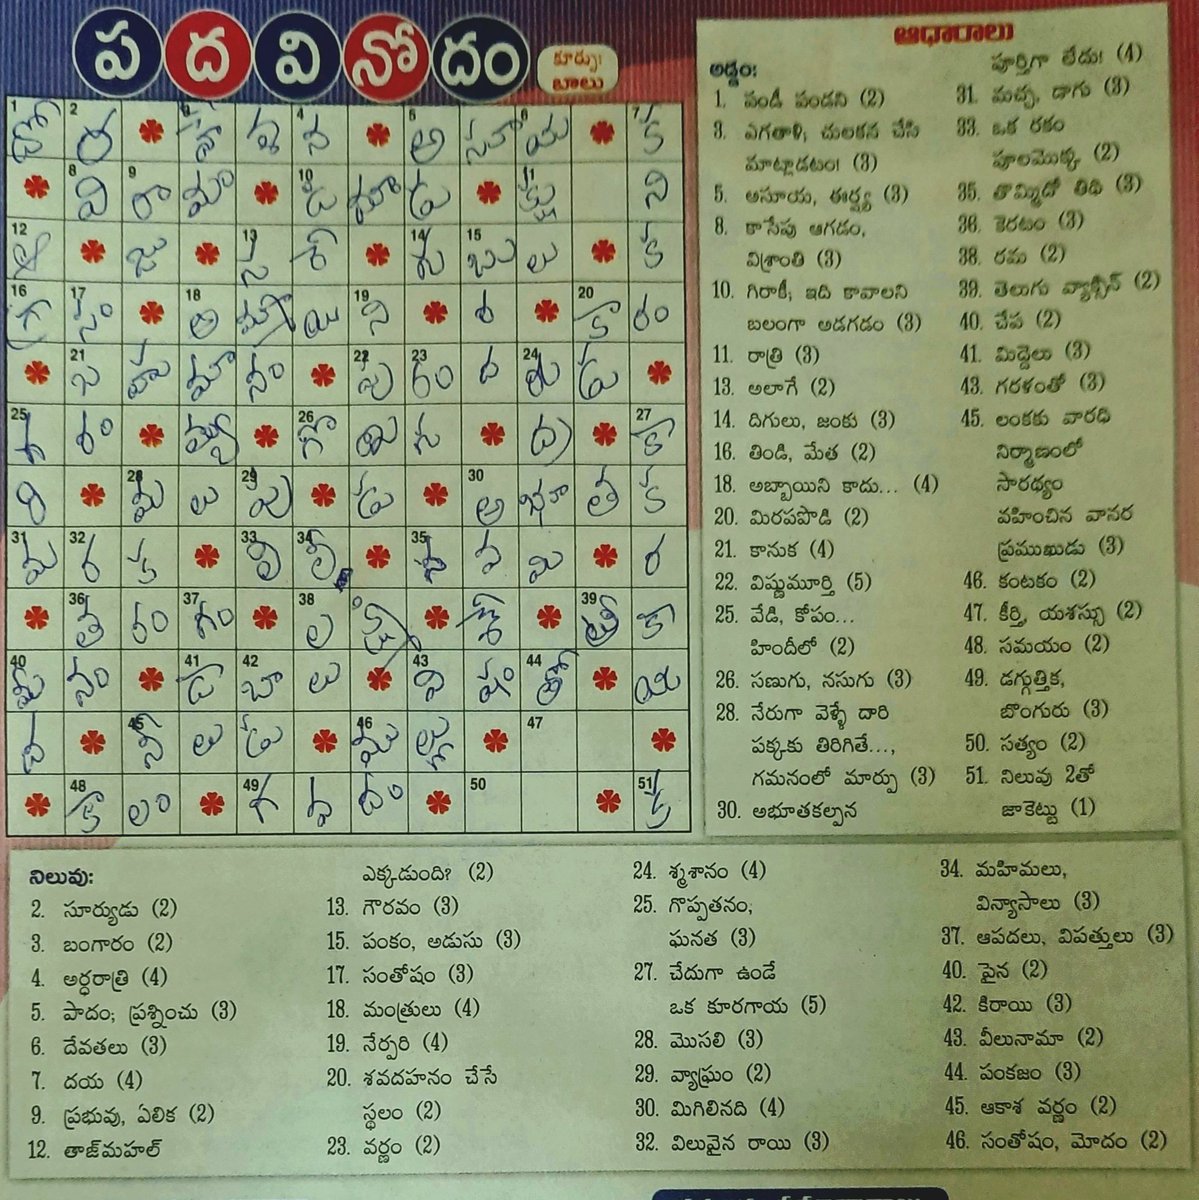 #crossword favorite #sunday pass time since childhood. A great engaging way to improve #language specially of #children. Stuck at 11 across and 44 down🙄. Any clues ?